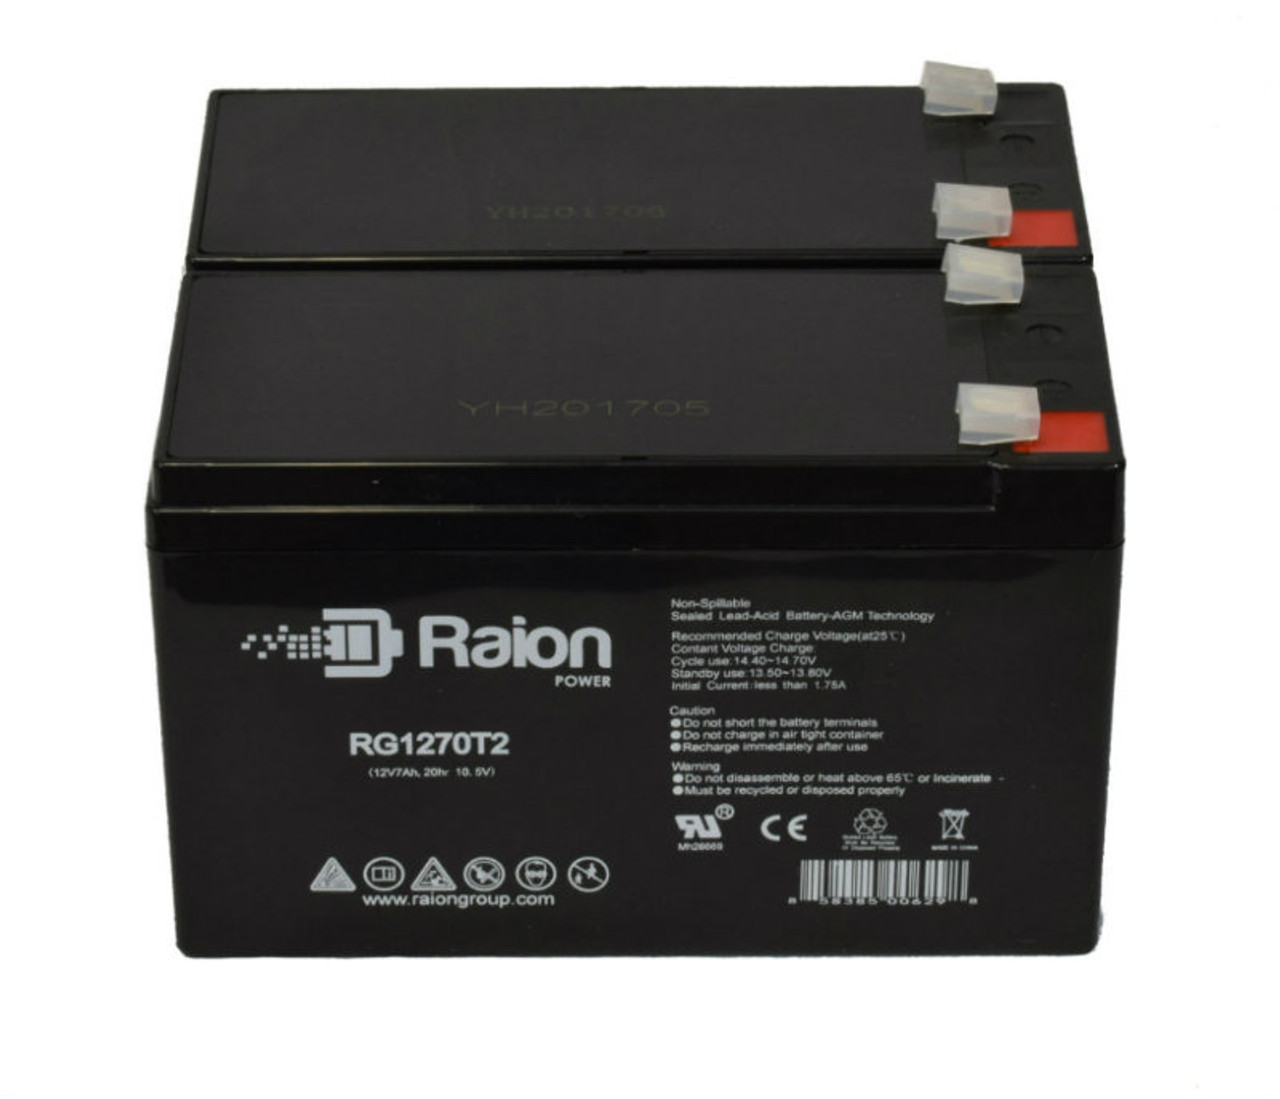 Raion Power Replacement 12V 7Ah Battery for Newmox FNC-1270-F2 - 2 Pack